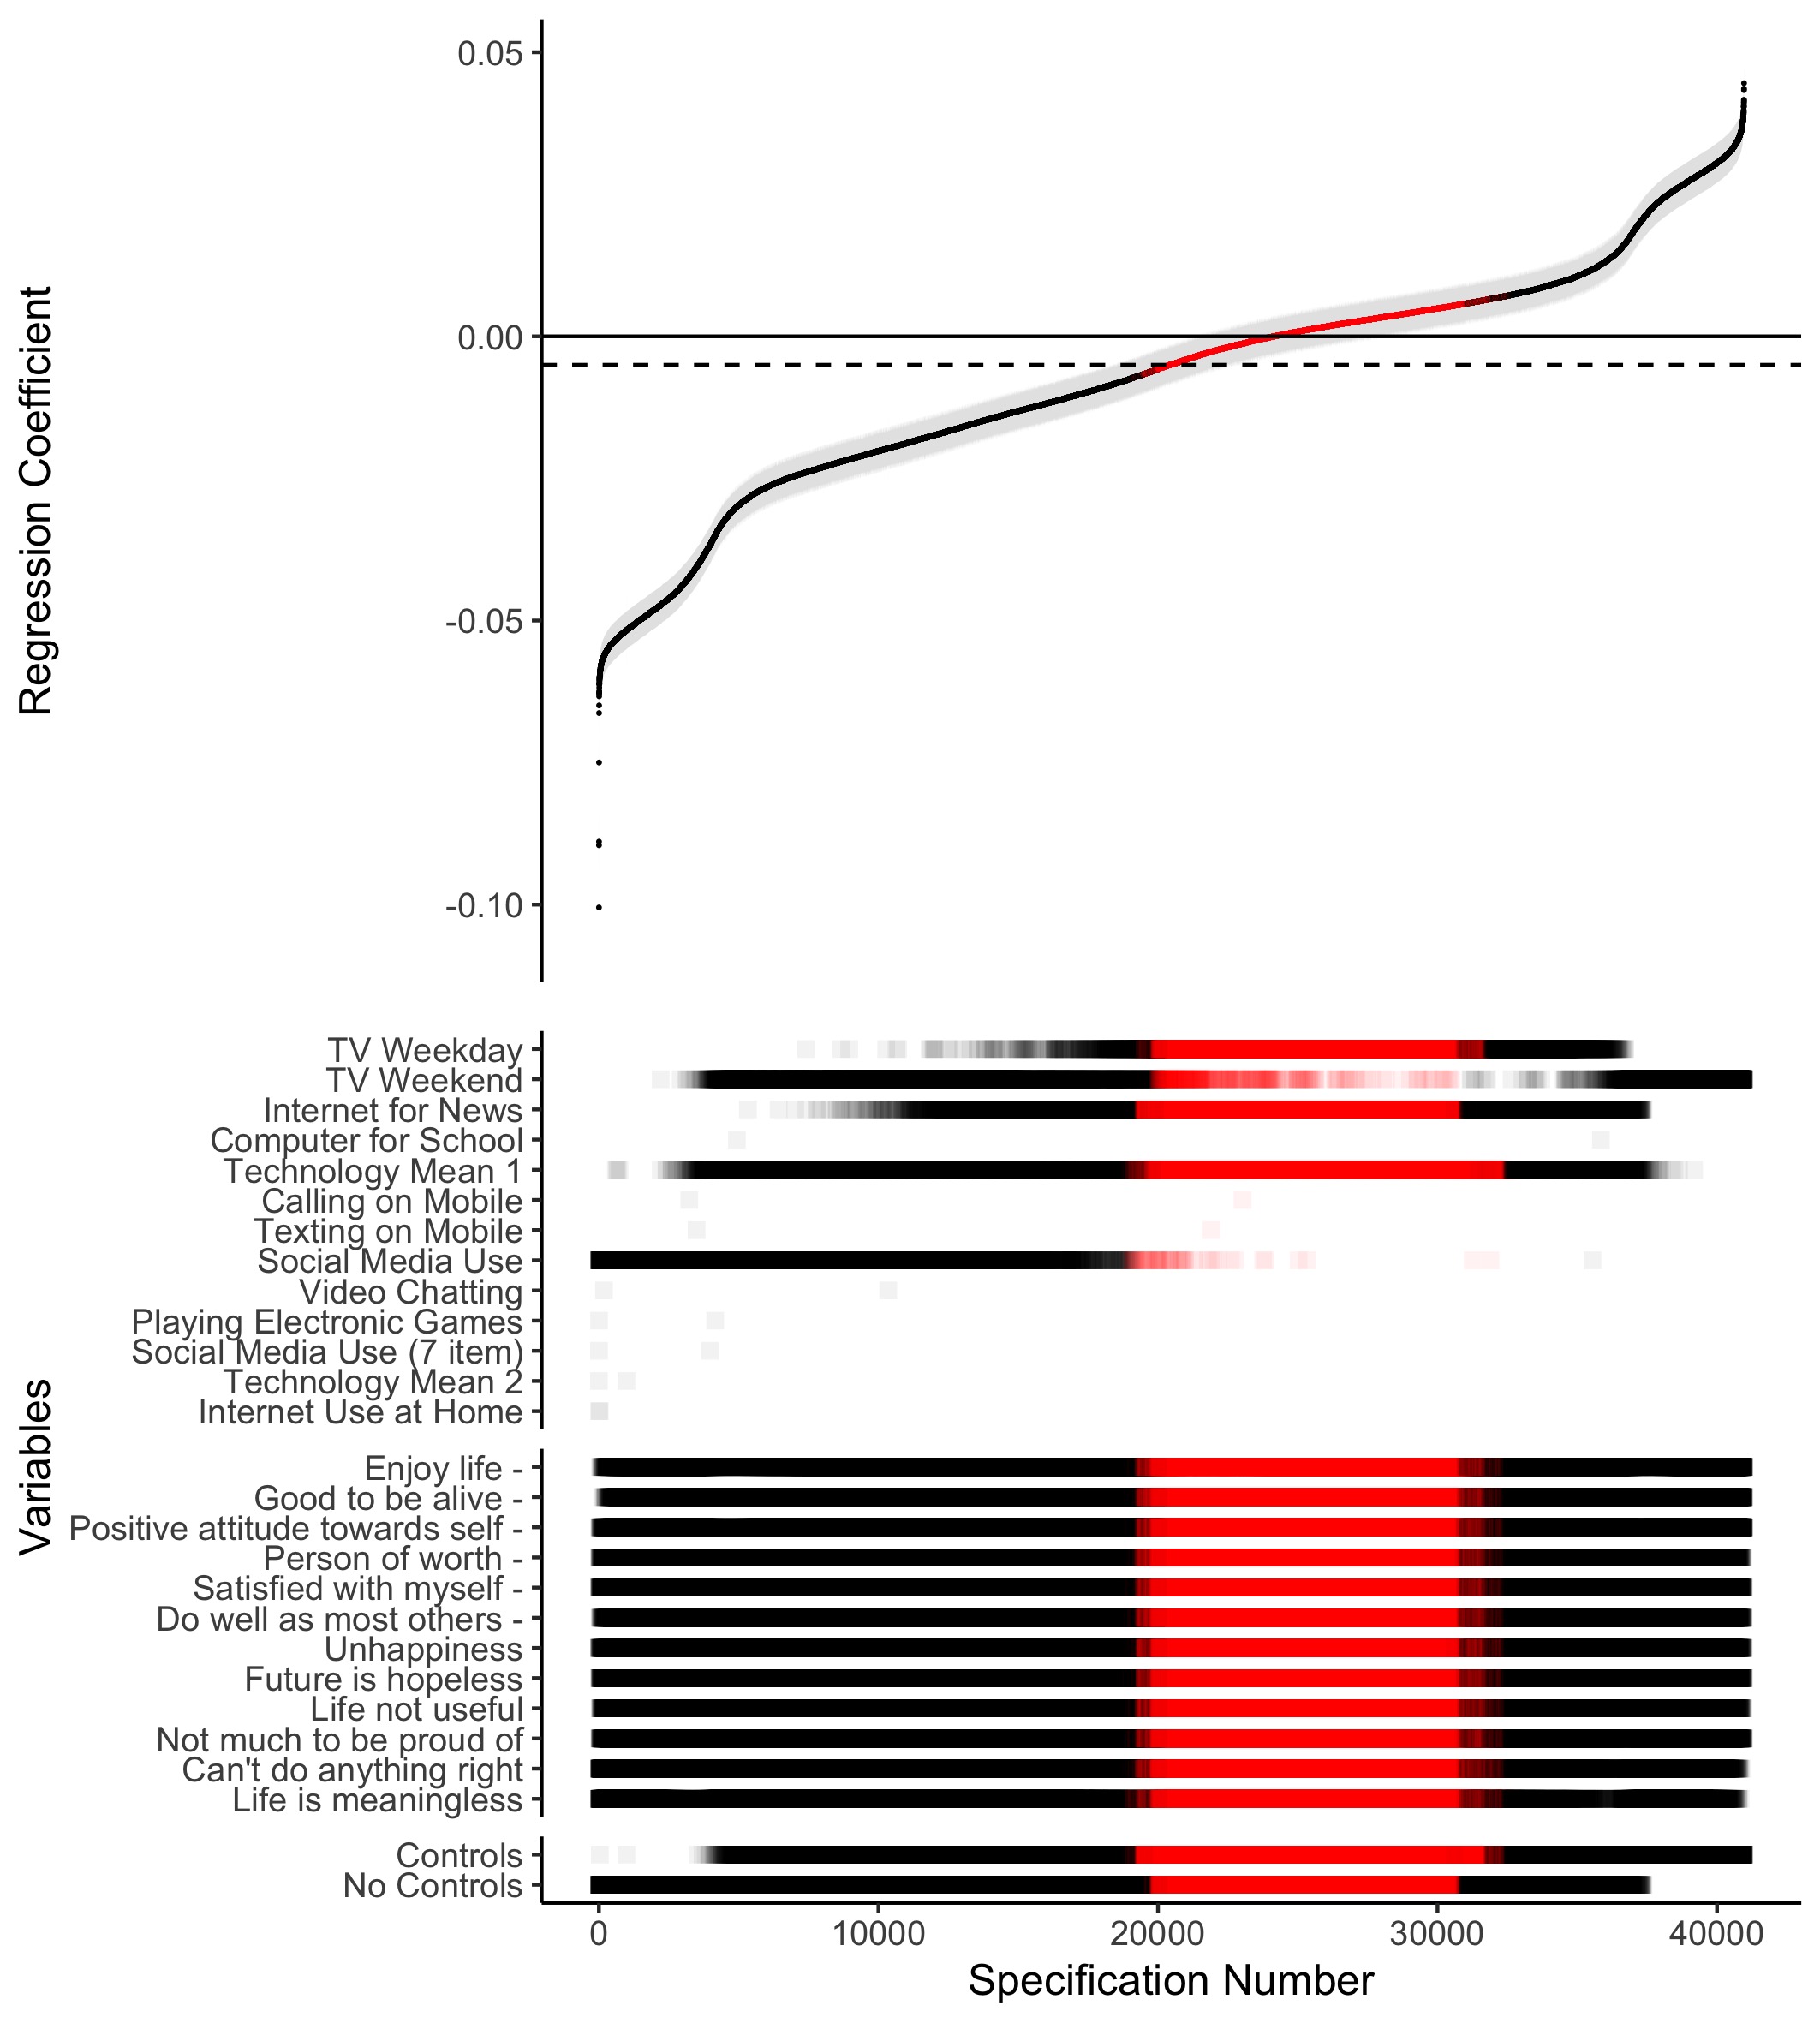 Specification Curve Analysis of MTF, also including the few specifications that included technology use items that were only asked in conjunction with a one-item happiness question. This subset of questions was excluded from the analyses in the main text to simplify the graphical representations and enhance comprehensibility. The red areas indicate specifications that were non-significant, while the black areas represent specifications that were significant. The error bars show the Standard Error. The dotted line indicates the median Regression Coefficient present in the SCA, and is included to ease interpretation of the analysis.